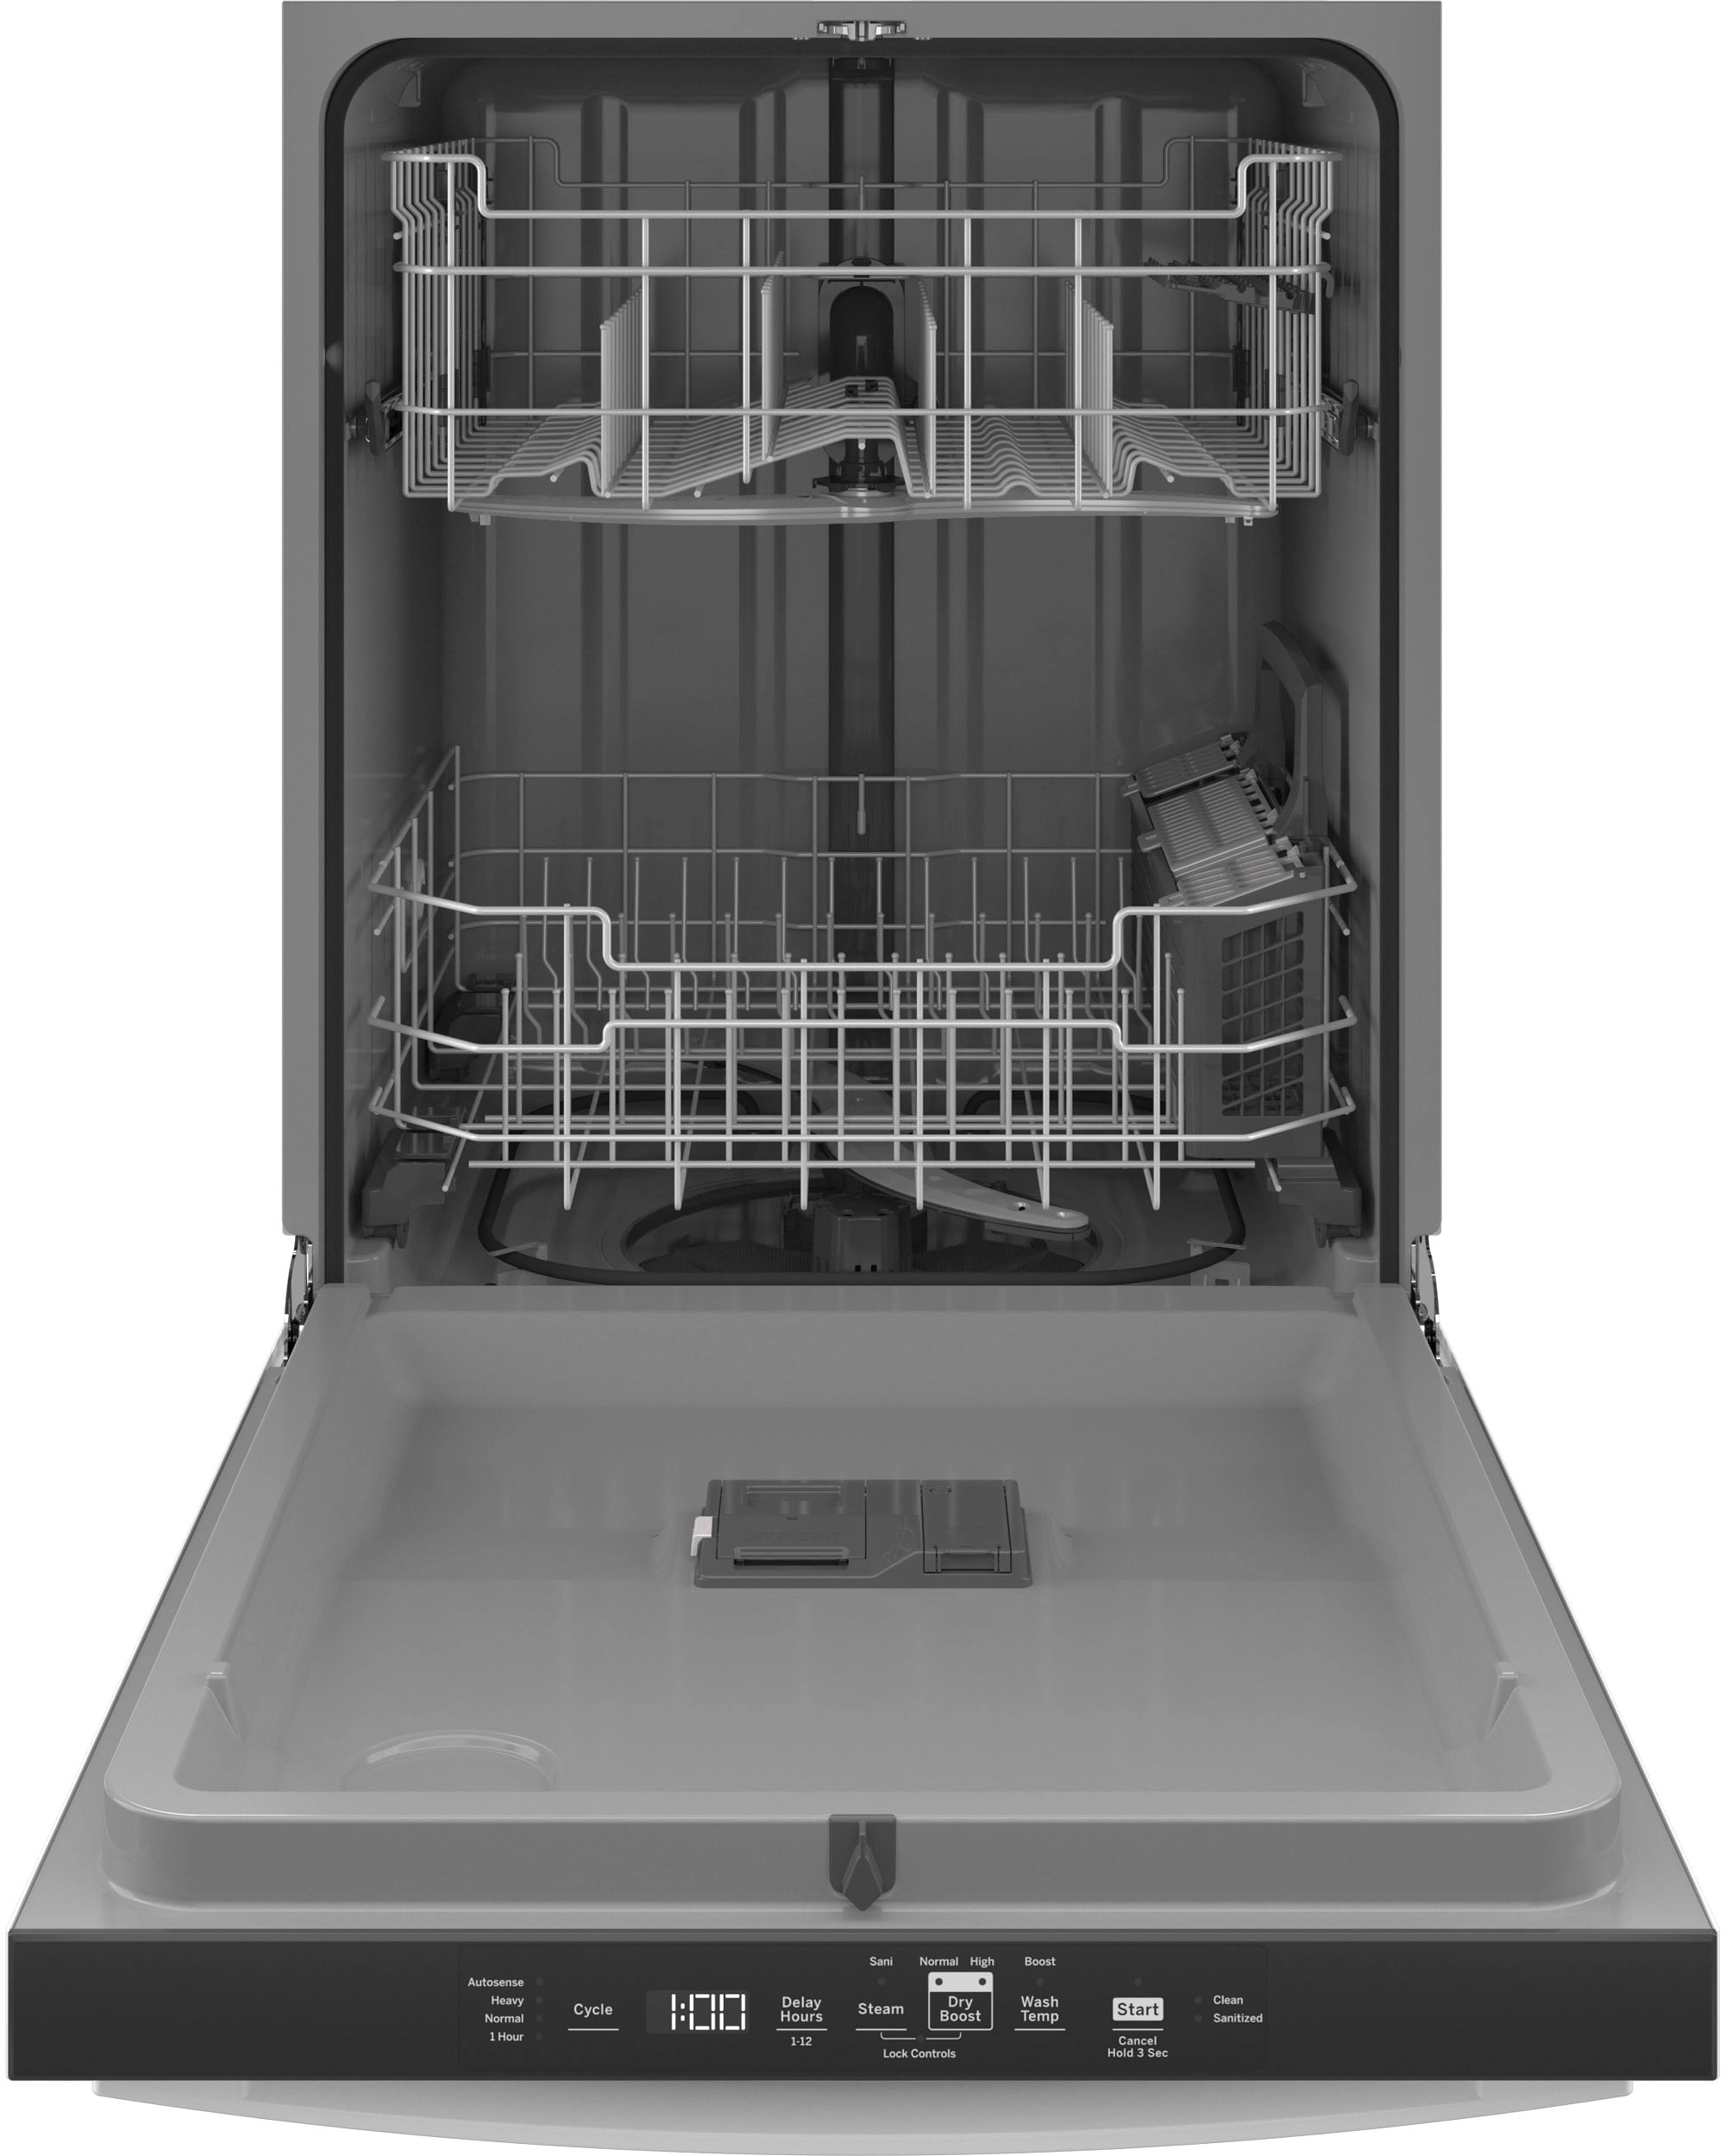 General Electric Built In Dishwasher with Top Control Controls 500 Series Wash System Plastic Interior Material Gloss Finish and White on White